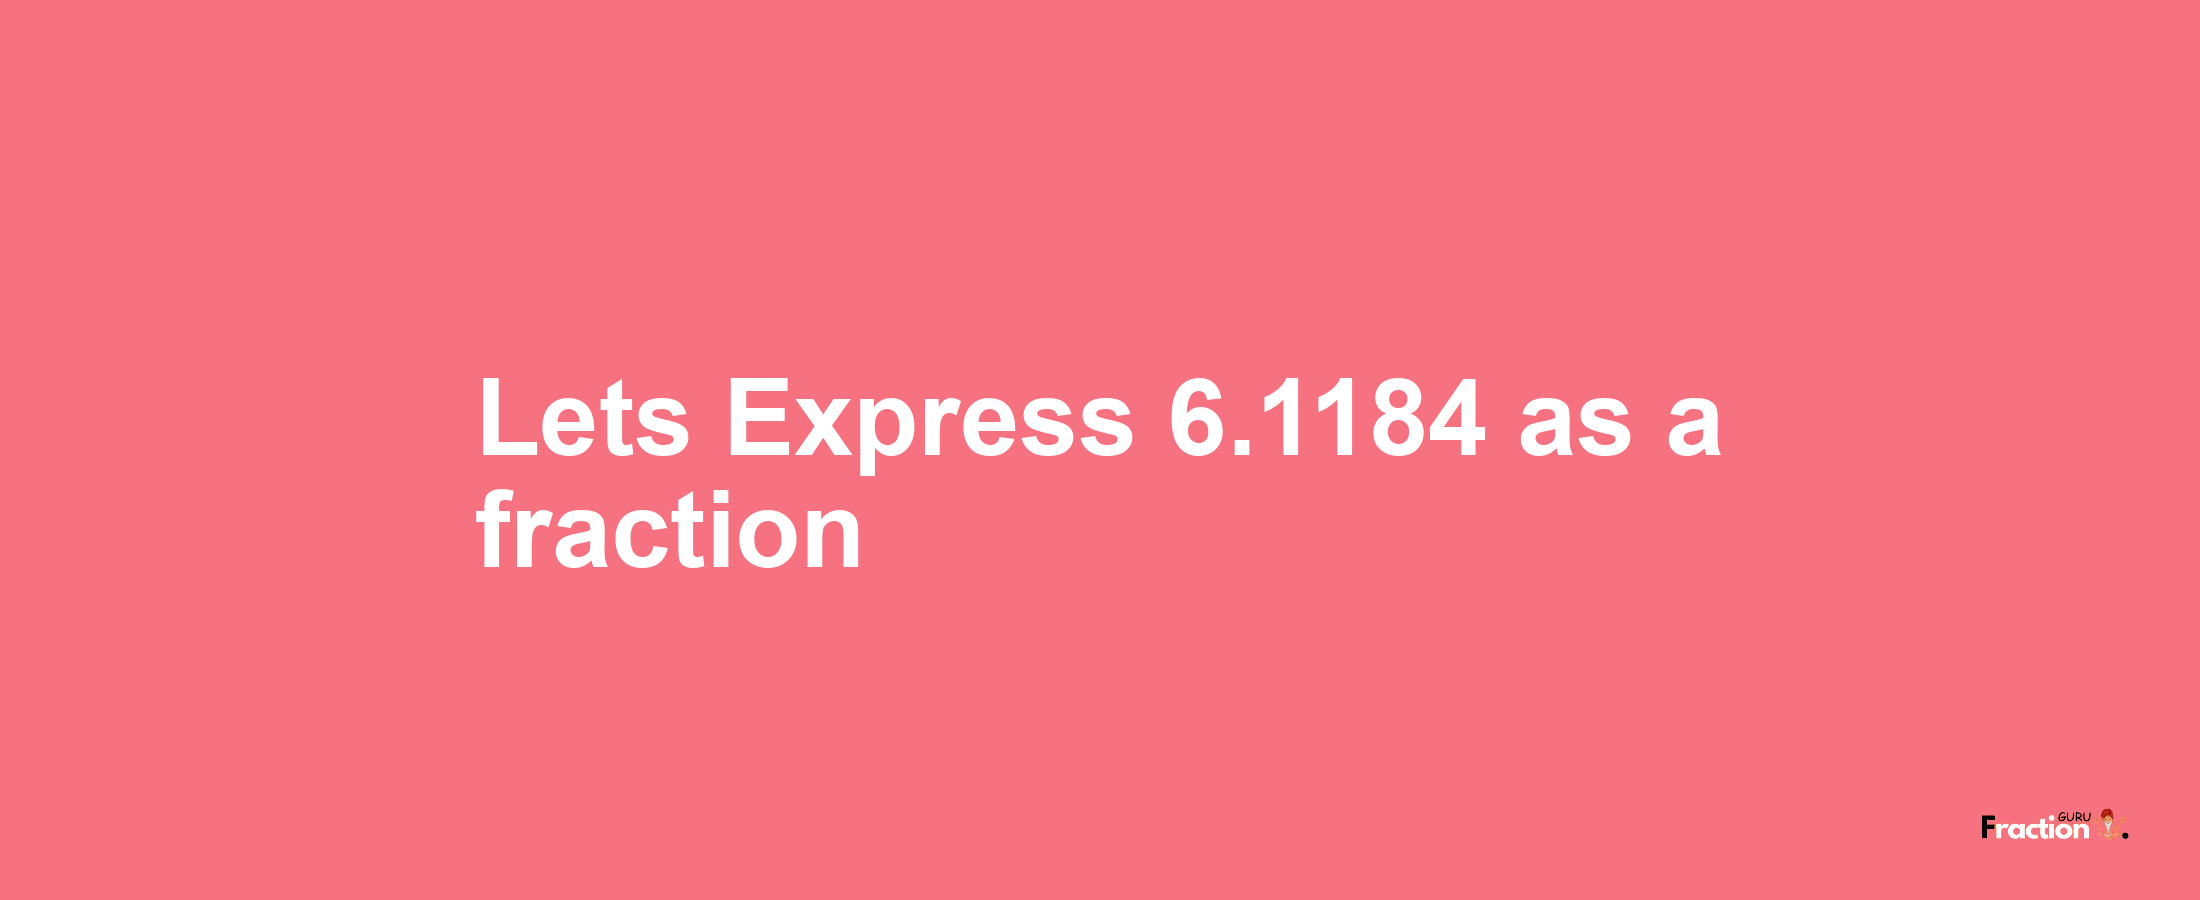 Lets Express 6.1184 as afraction